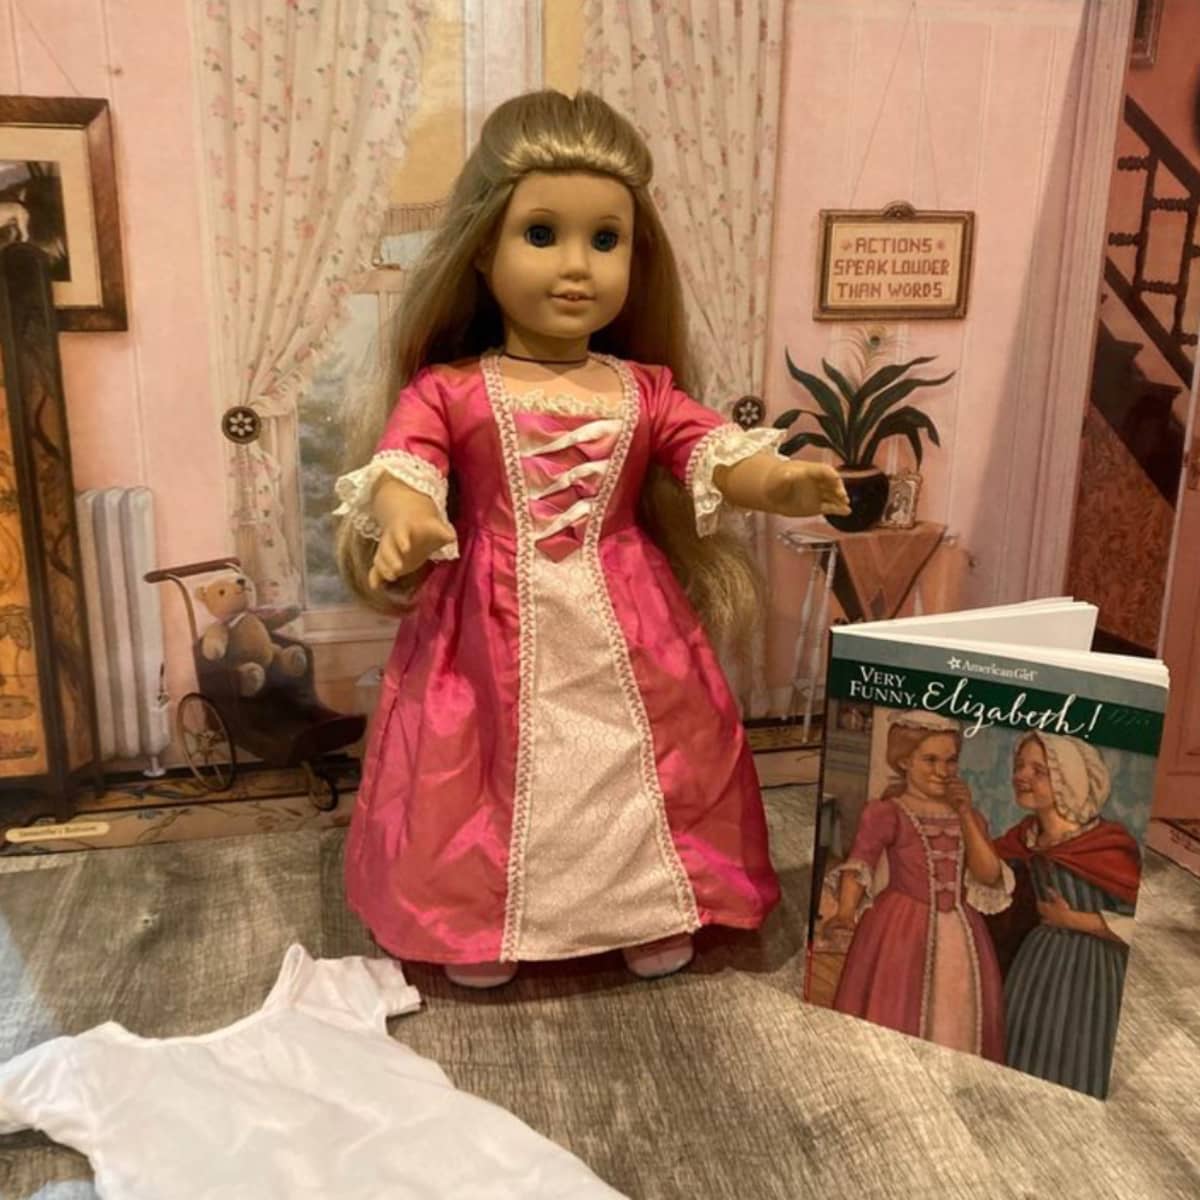 The 4 Best Places to Buy Retired American Girl Products Online - HobbyLark